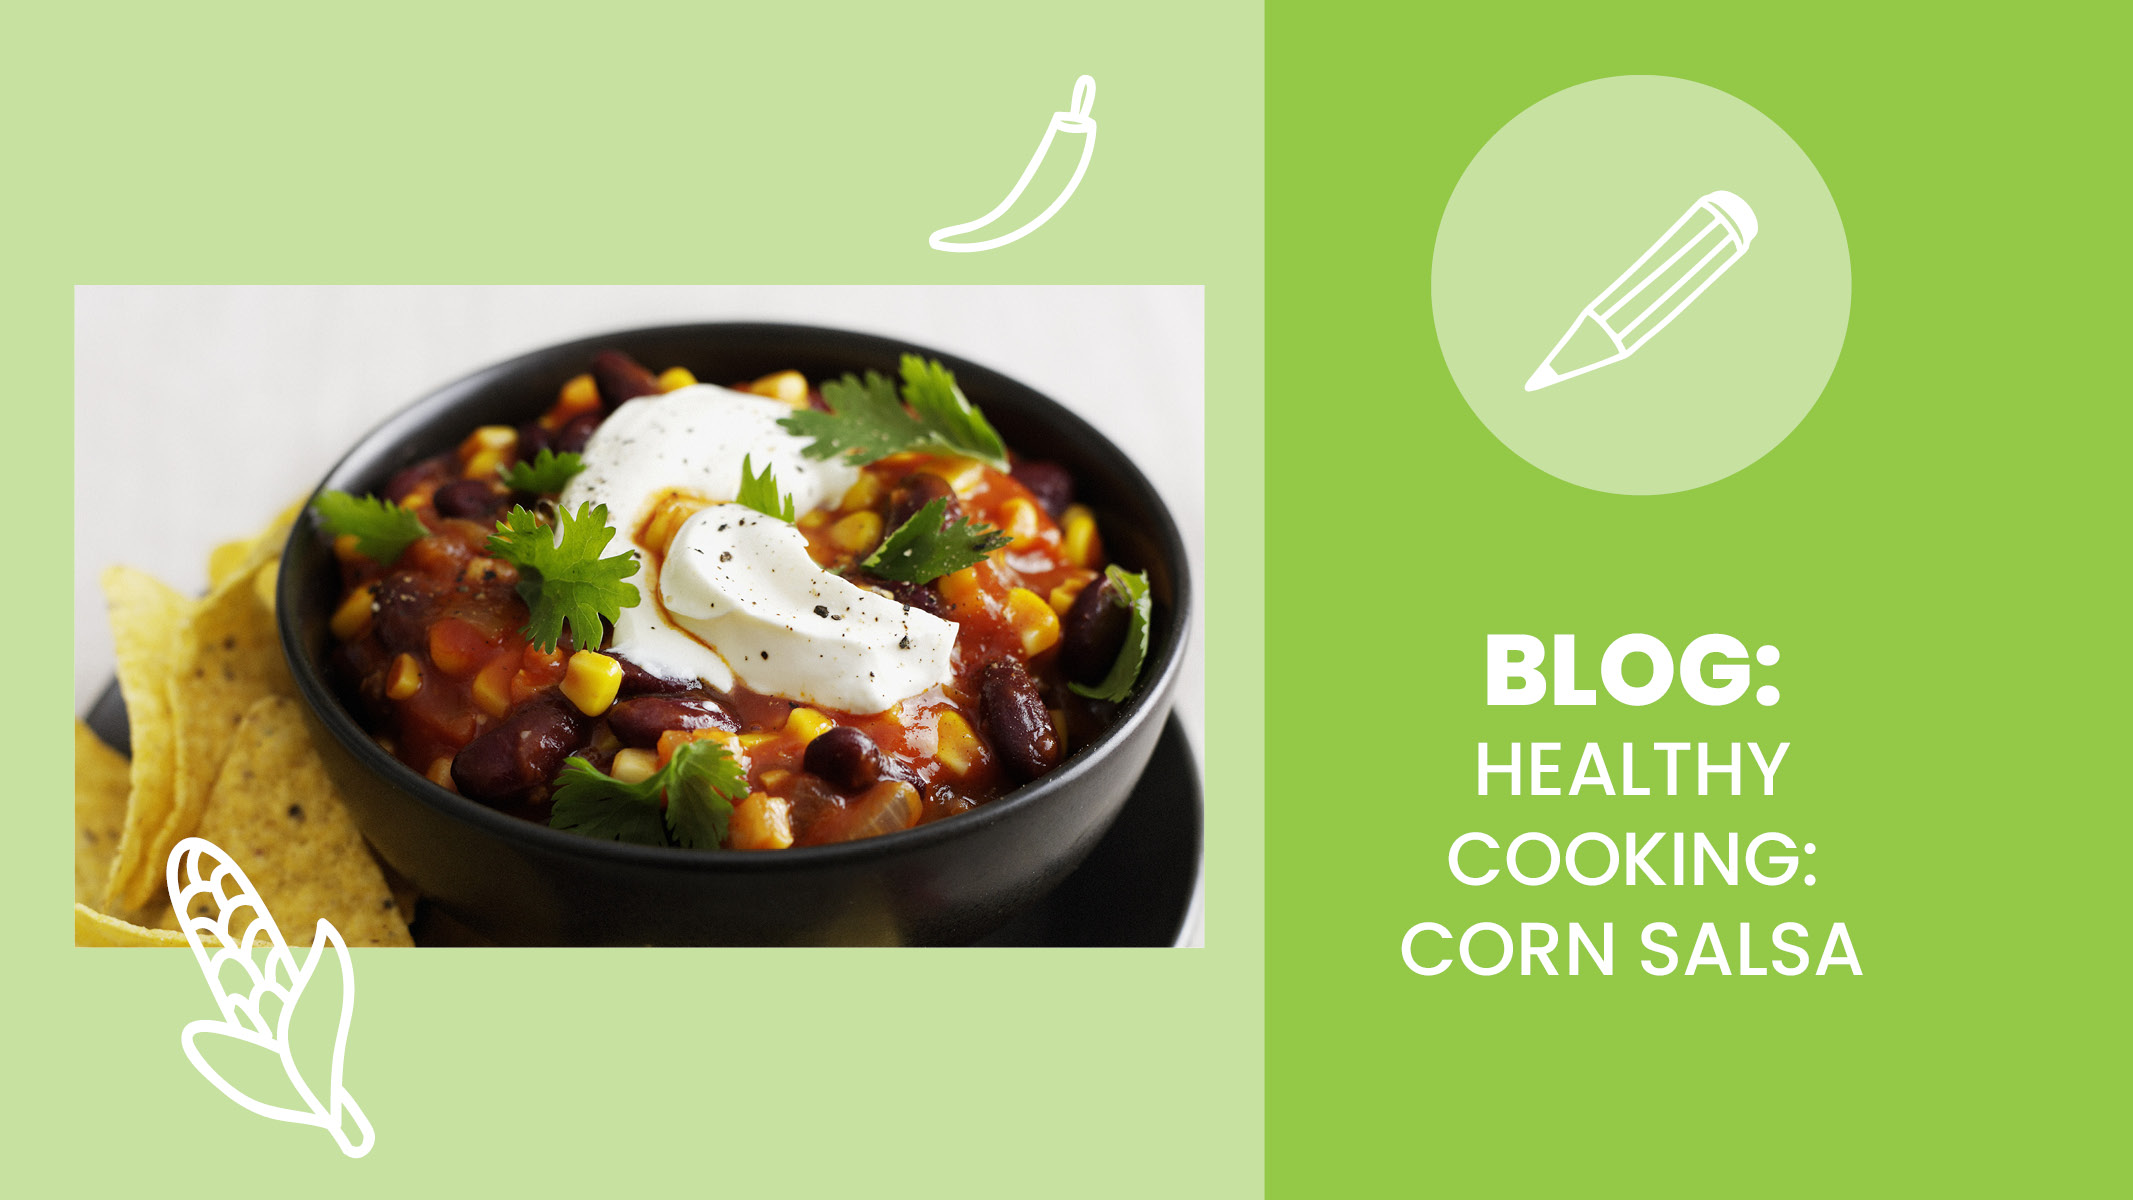 Bowl of healthy corn salsa made as a snack